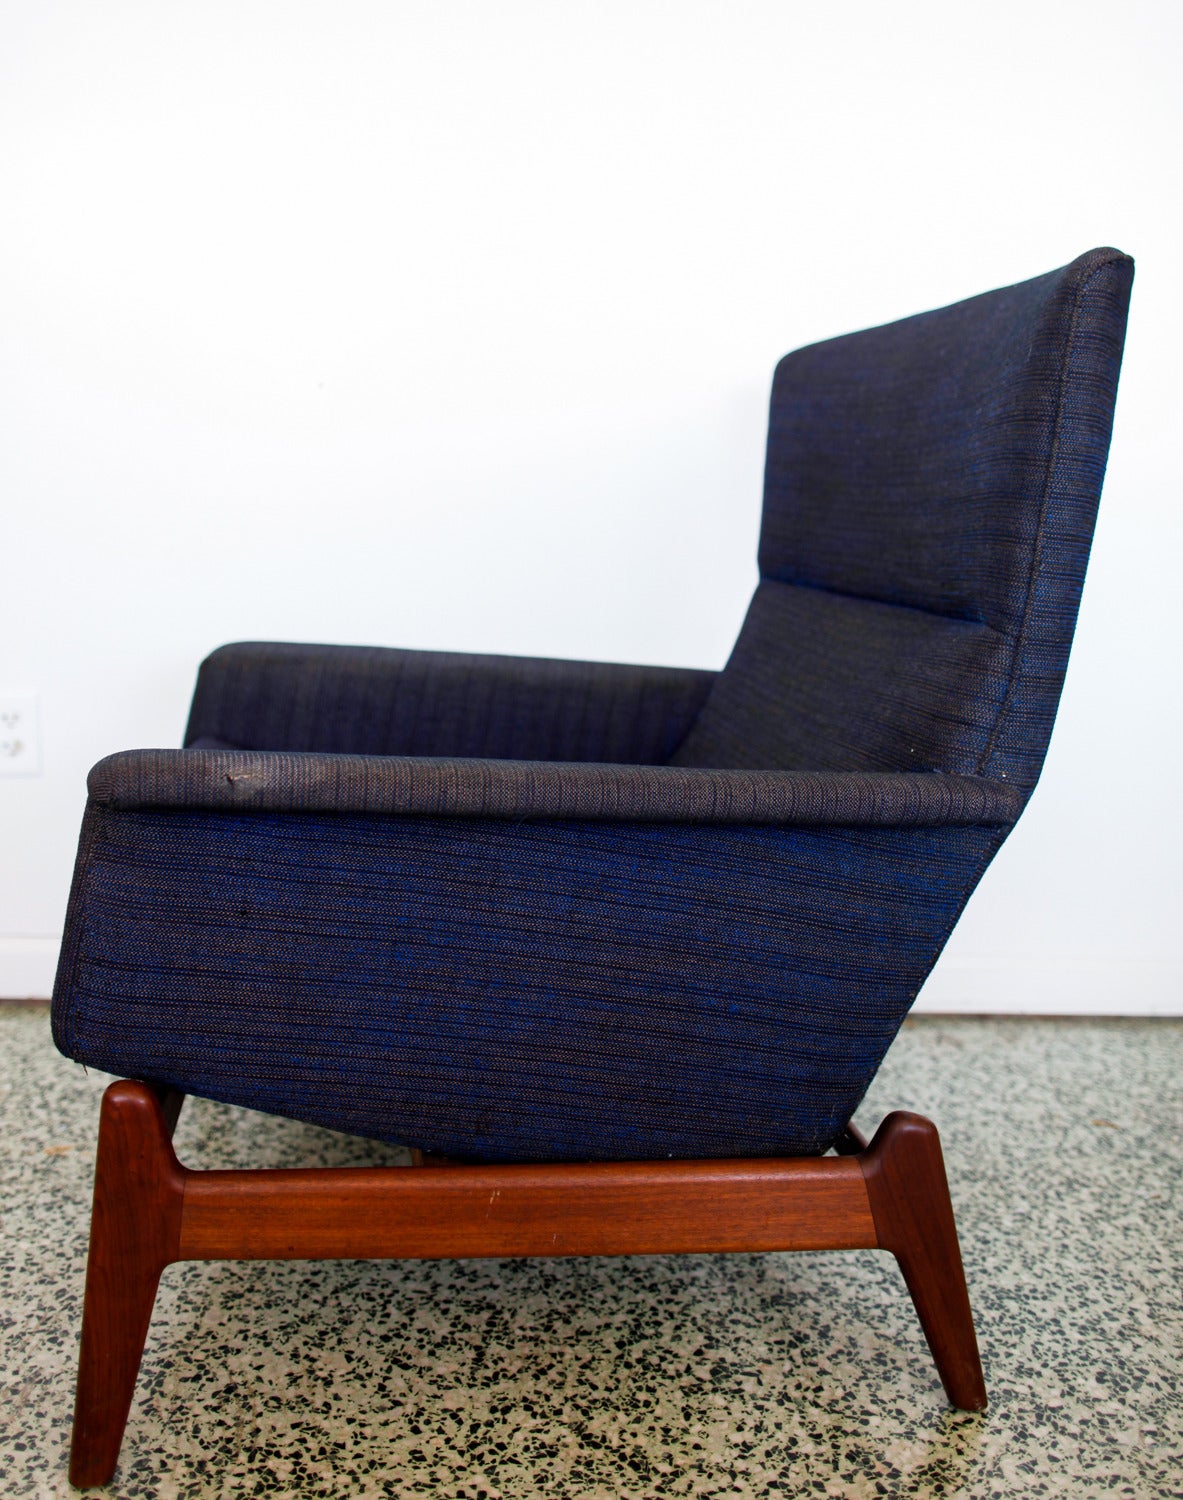 Mid-Century modern arm chair / lounge chair by Dux.
Very rare reclining model.
Solid modern style and comfort.
Sturdy walnut frame. We recommend reupholstery for this item.